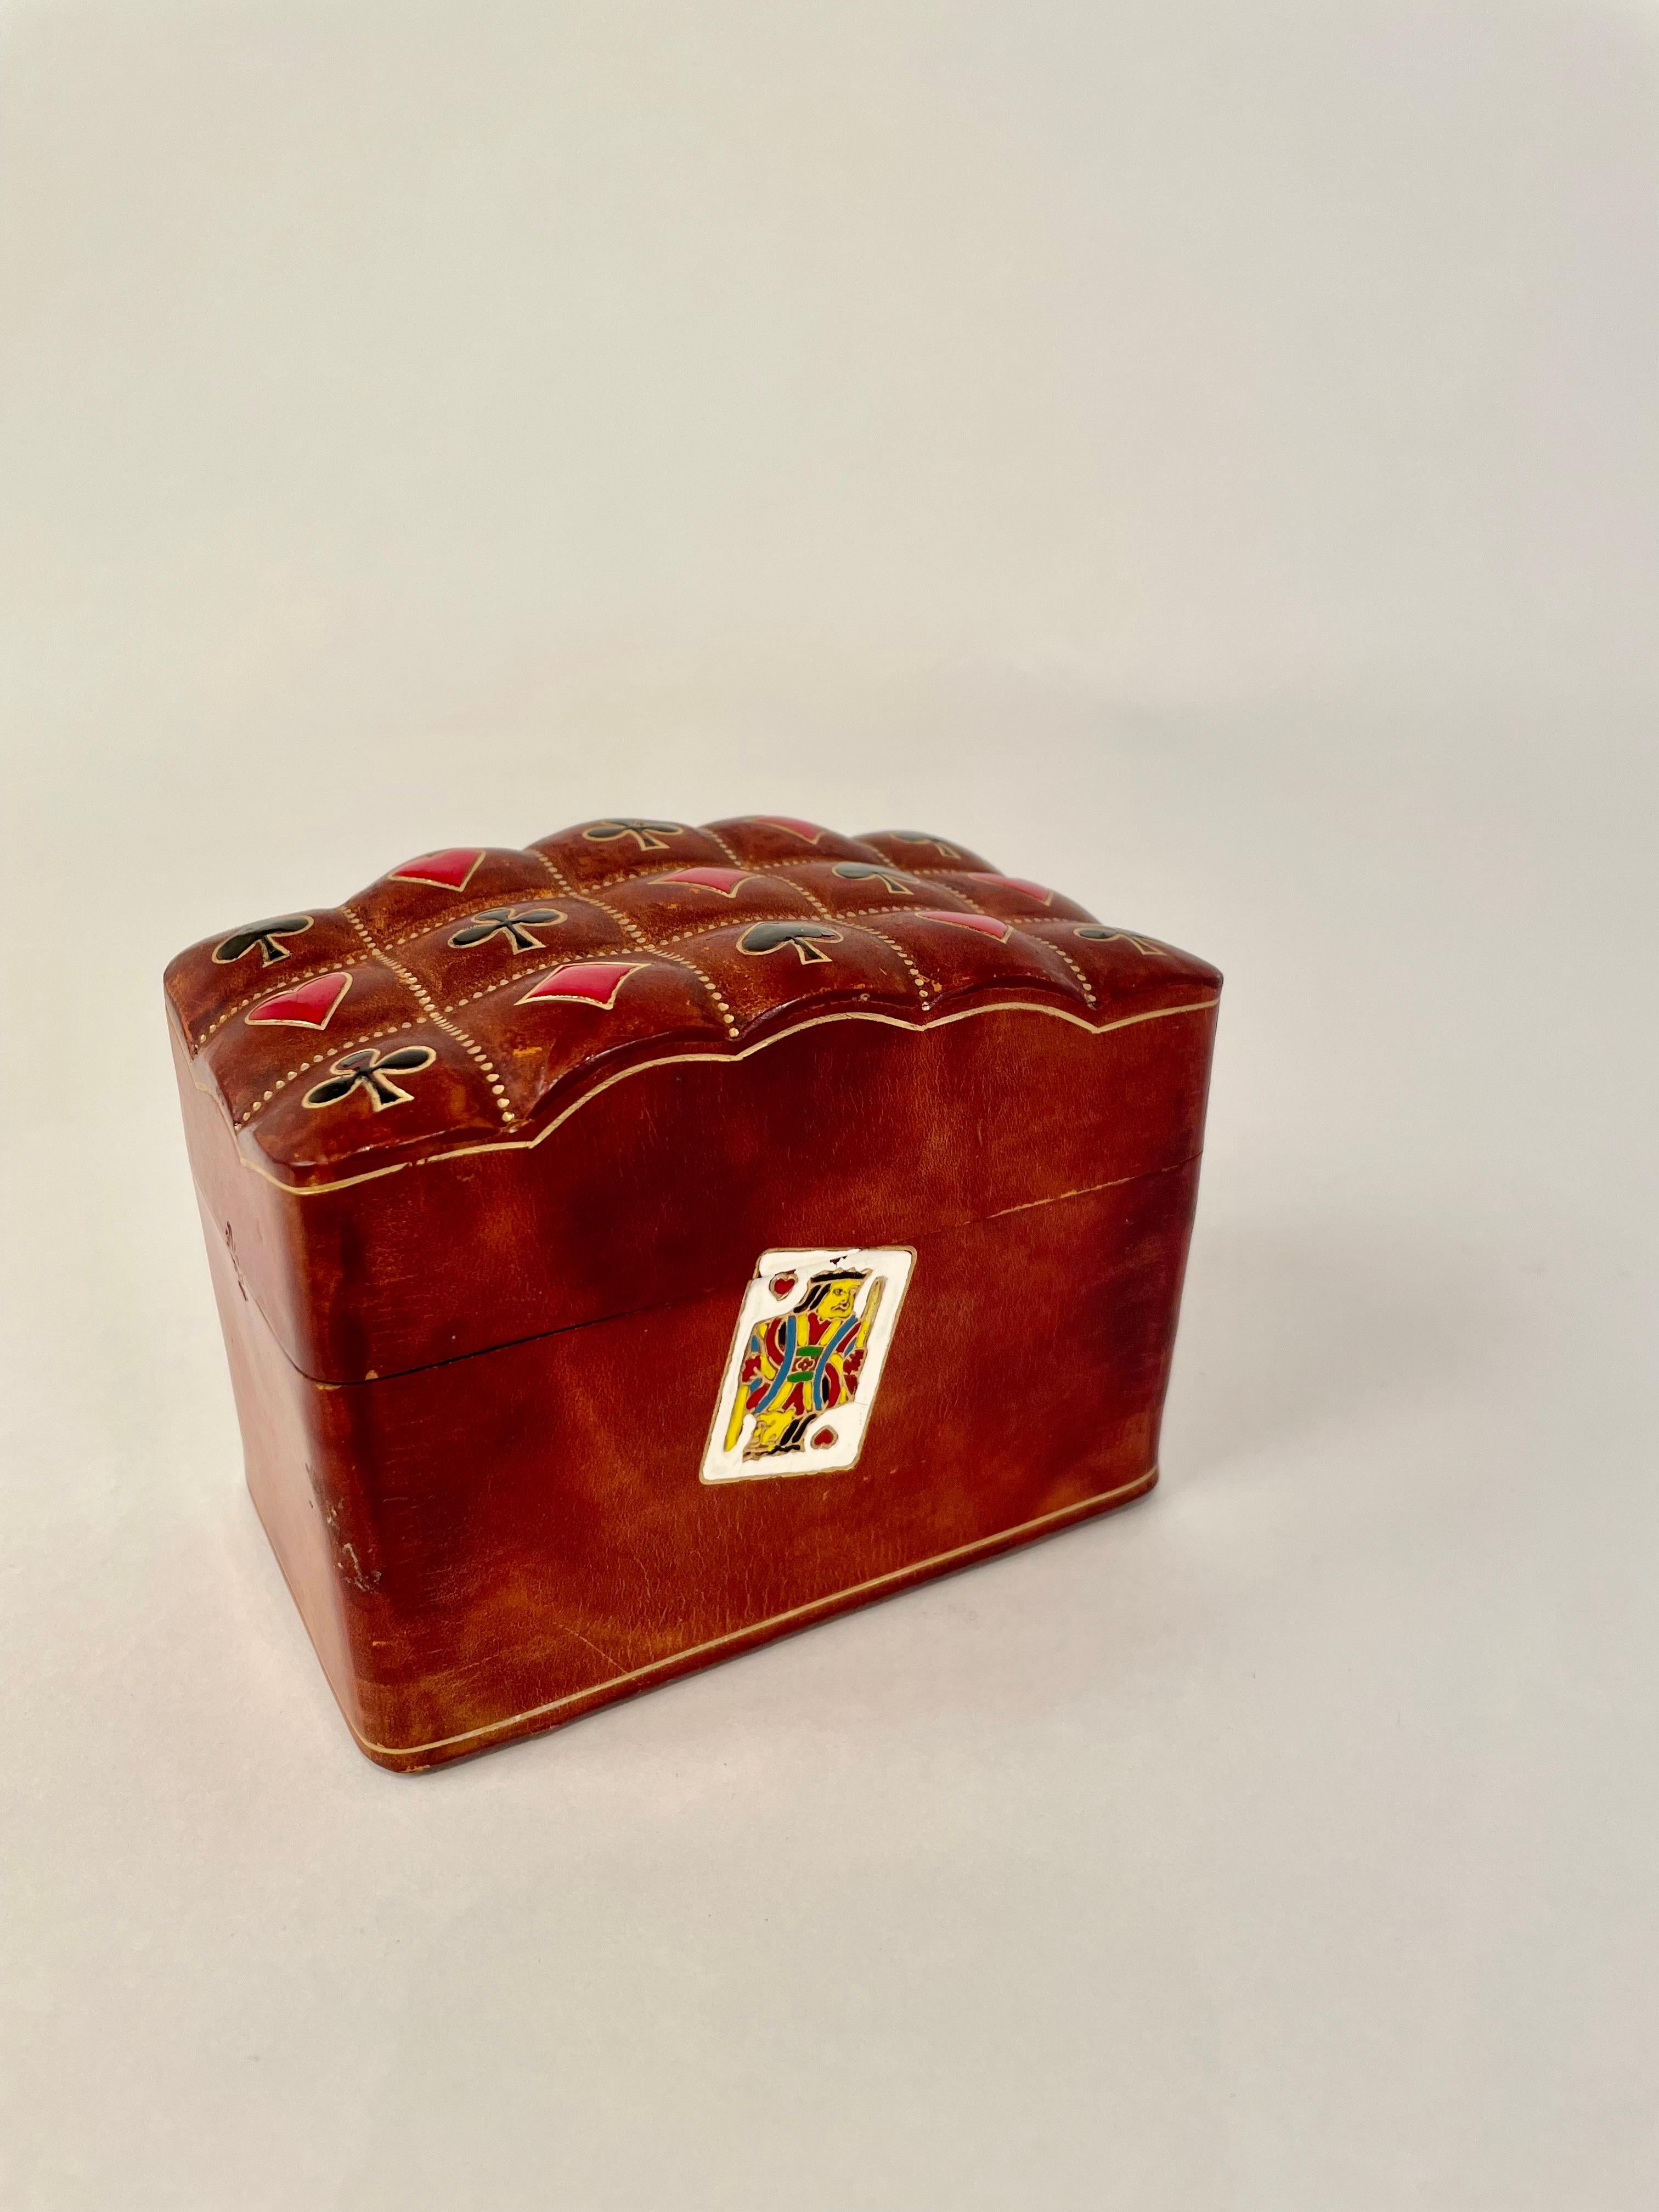 Wonderful Italian handcrafted tooled leather playing card case with painted enamel-like decoration of cards on the sides and symbols for all the suites, clubs, diamonds, spades and hearts on the cushion top. Beautifully made and clearly loved, a